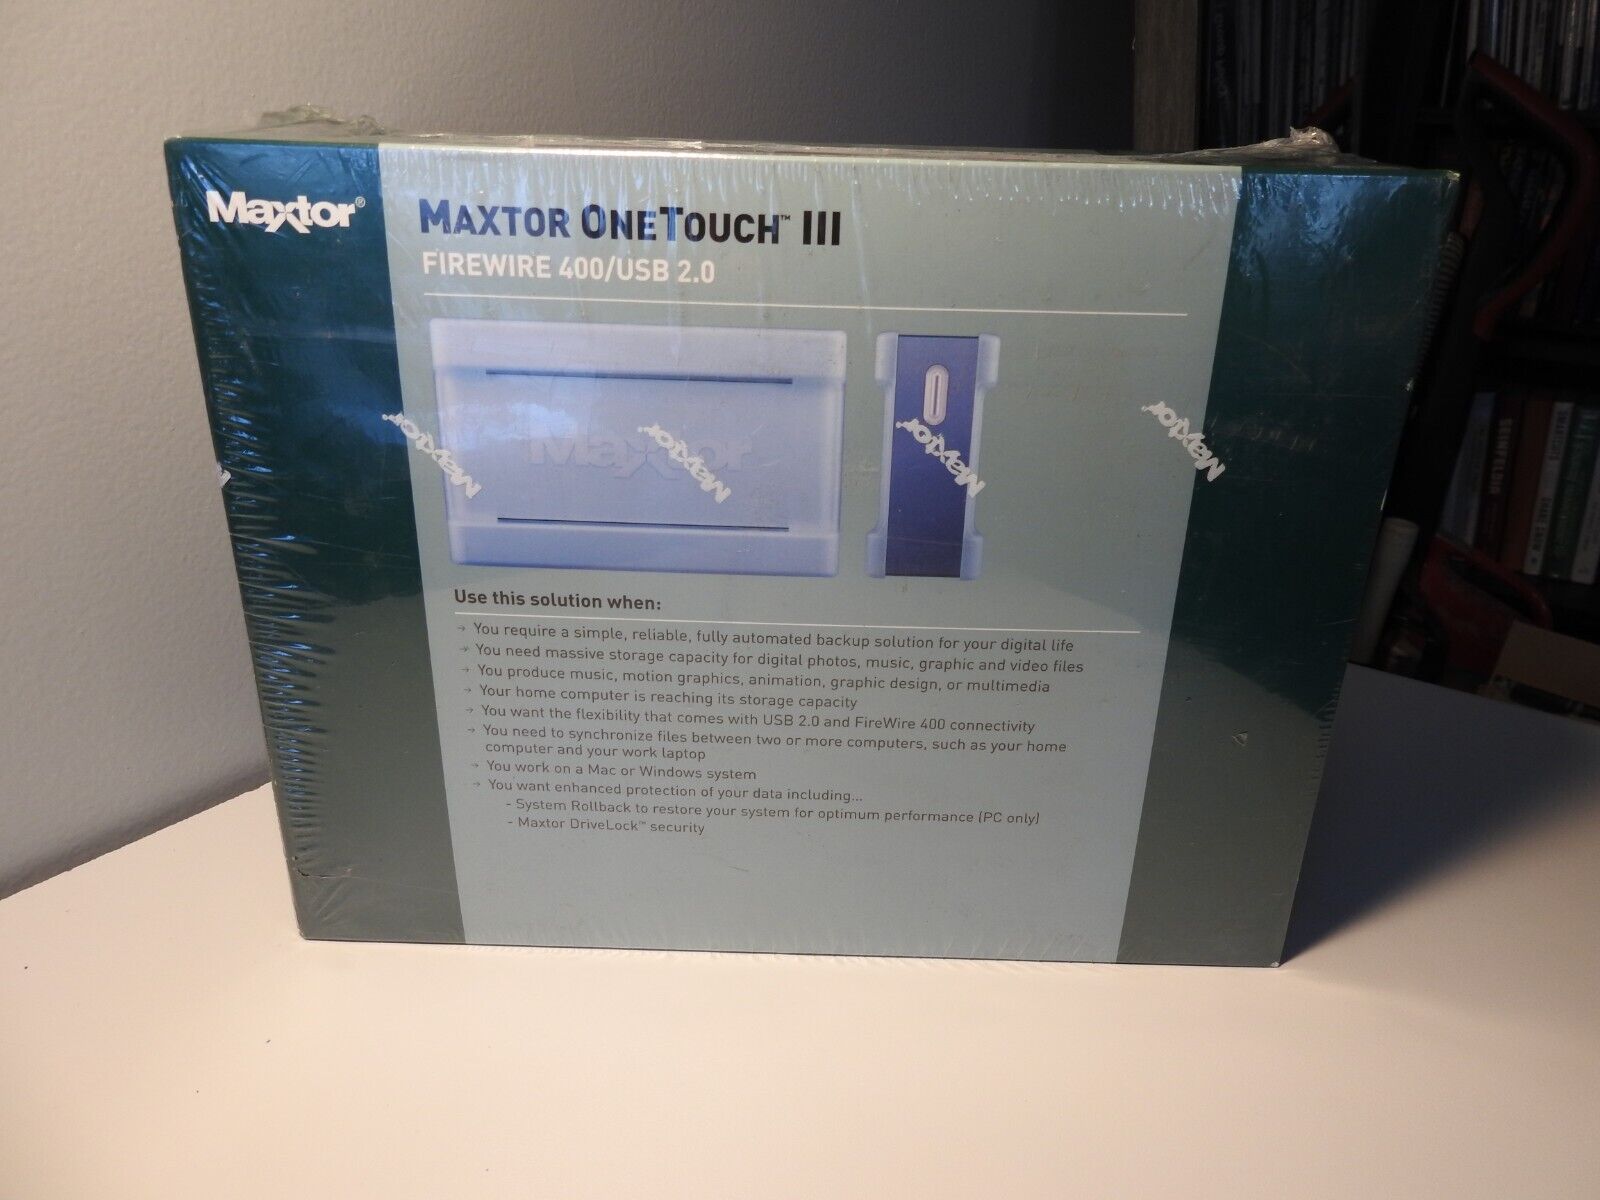 NEW Boxed Maxtor One Touch III 320GB USB 2.0 External Hard Drive IEEE 1394a